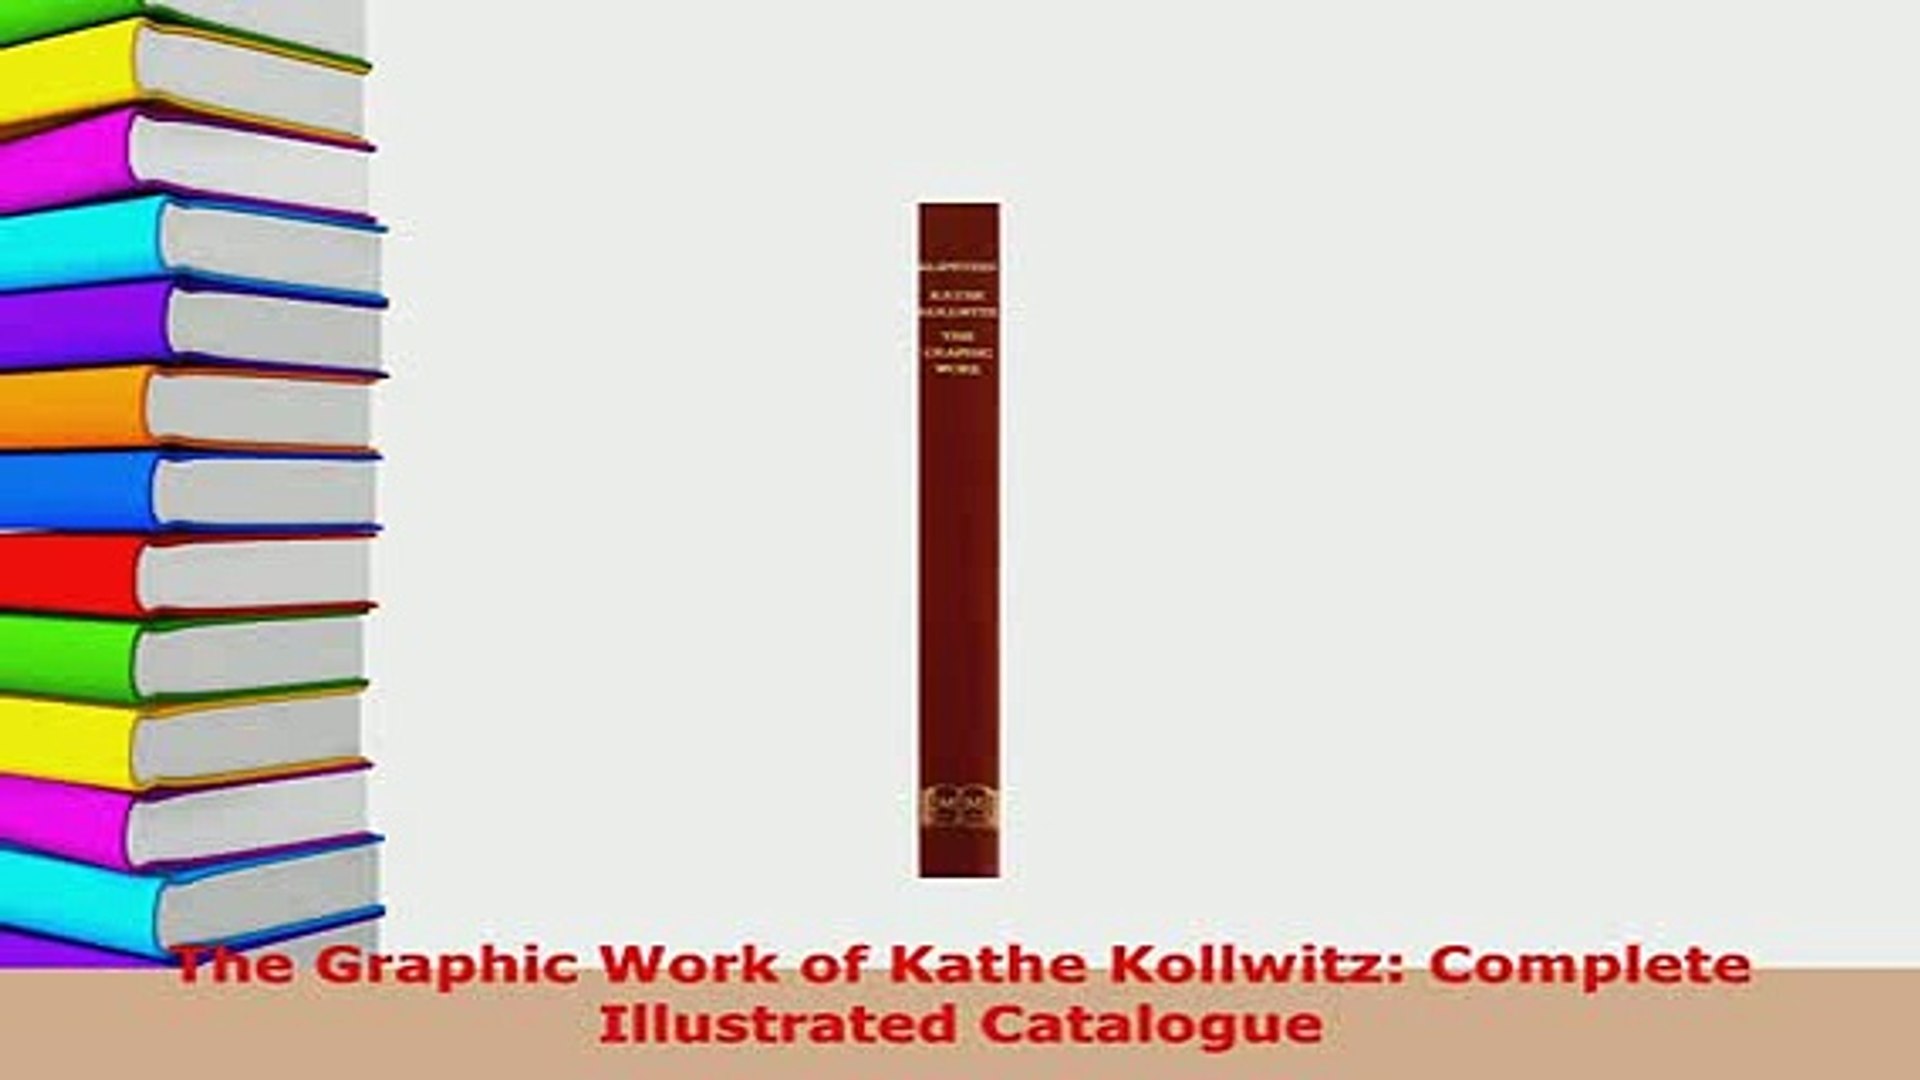 The Graphic Work of Kathe Kollwitz Complete Illustrated Catalogue